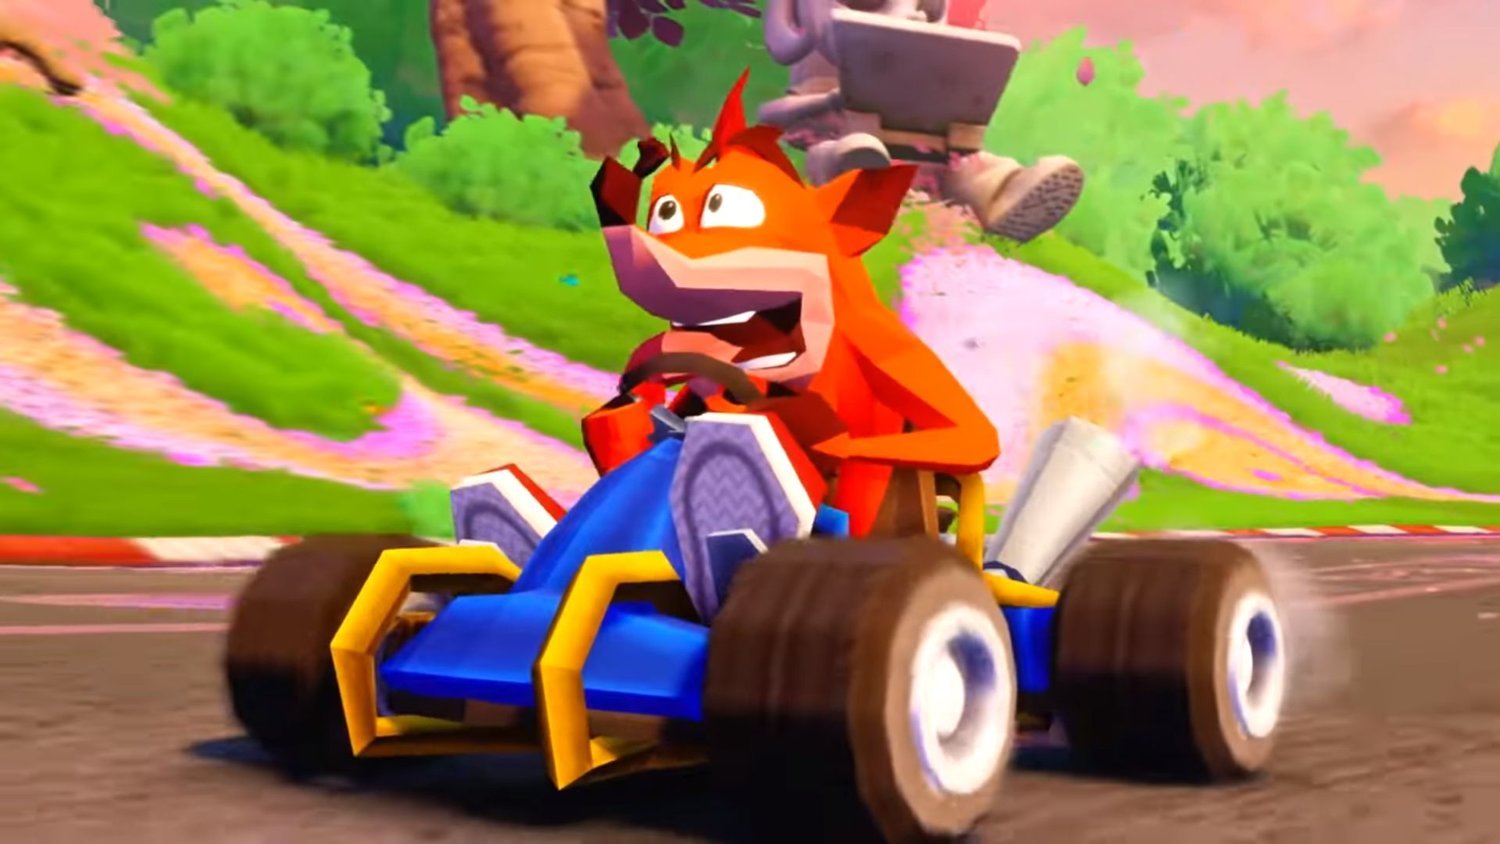 CRASH TEAM RACING NITRO FUELED Will Include Content From CRASH NITRO KART And Exclusive Content Announced For PS4